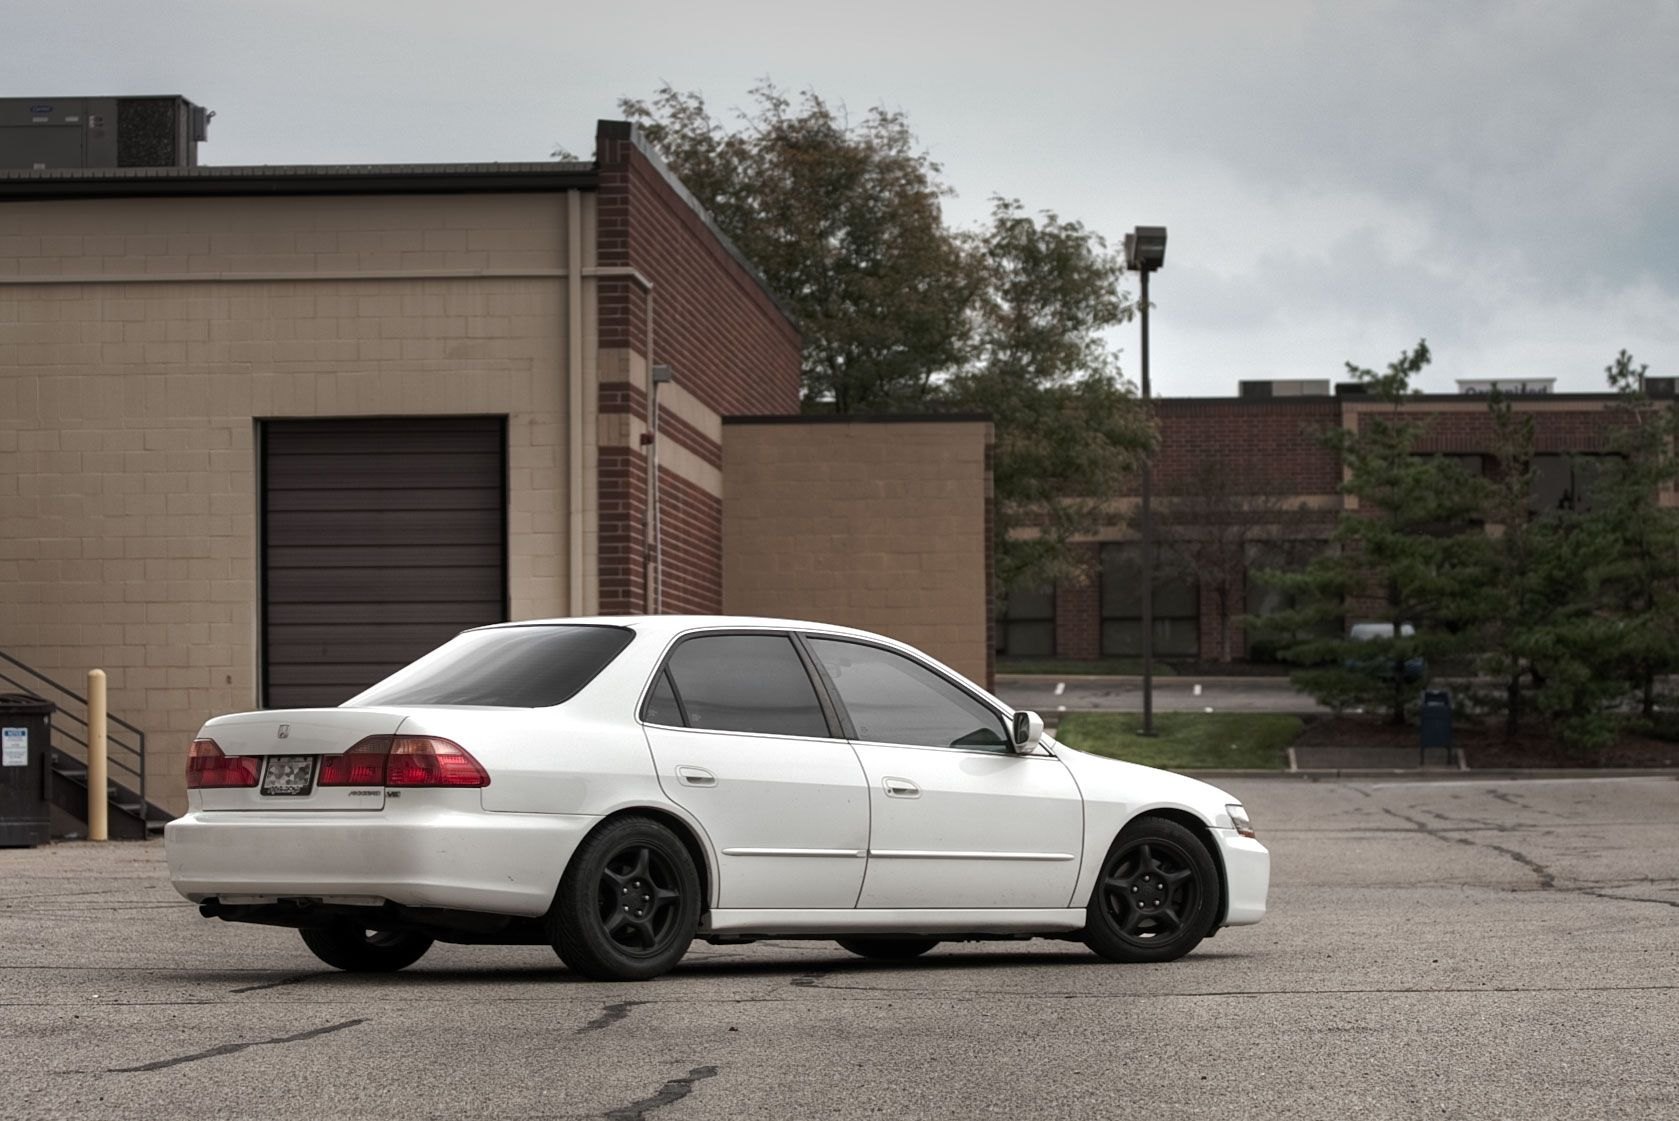 White Honda Accord with Red Taillights  - Photo by dan kinzie